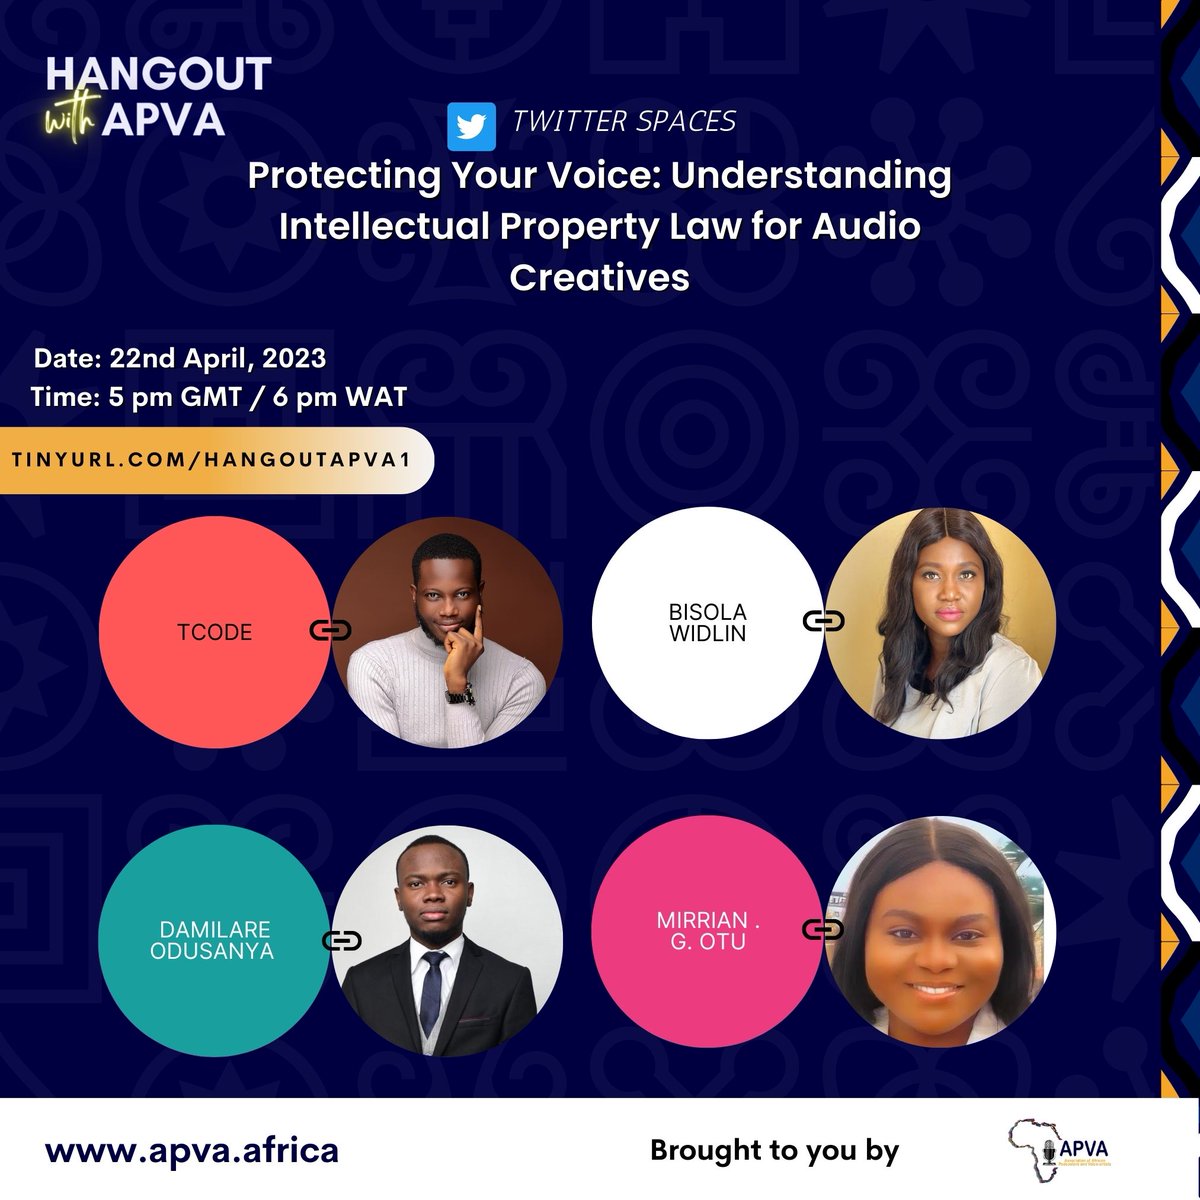 Do you know your rights as an audio creative? Our upcoming event will equip you with the knowledge you need to protect your voice and intellectual property. Save the date!
..
.
.
.
#APVA #HangOutwithAPVA #TheAfricanCreative #Voiceovers #Law #Legal